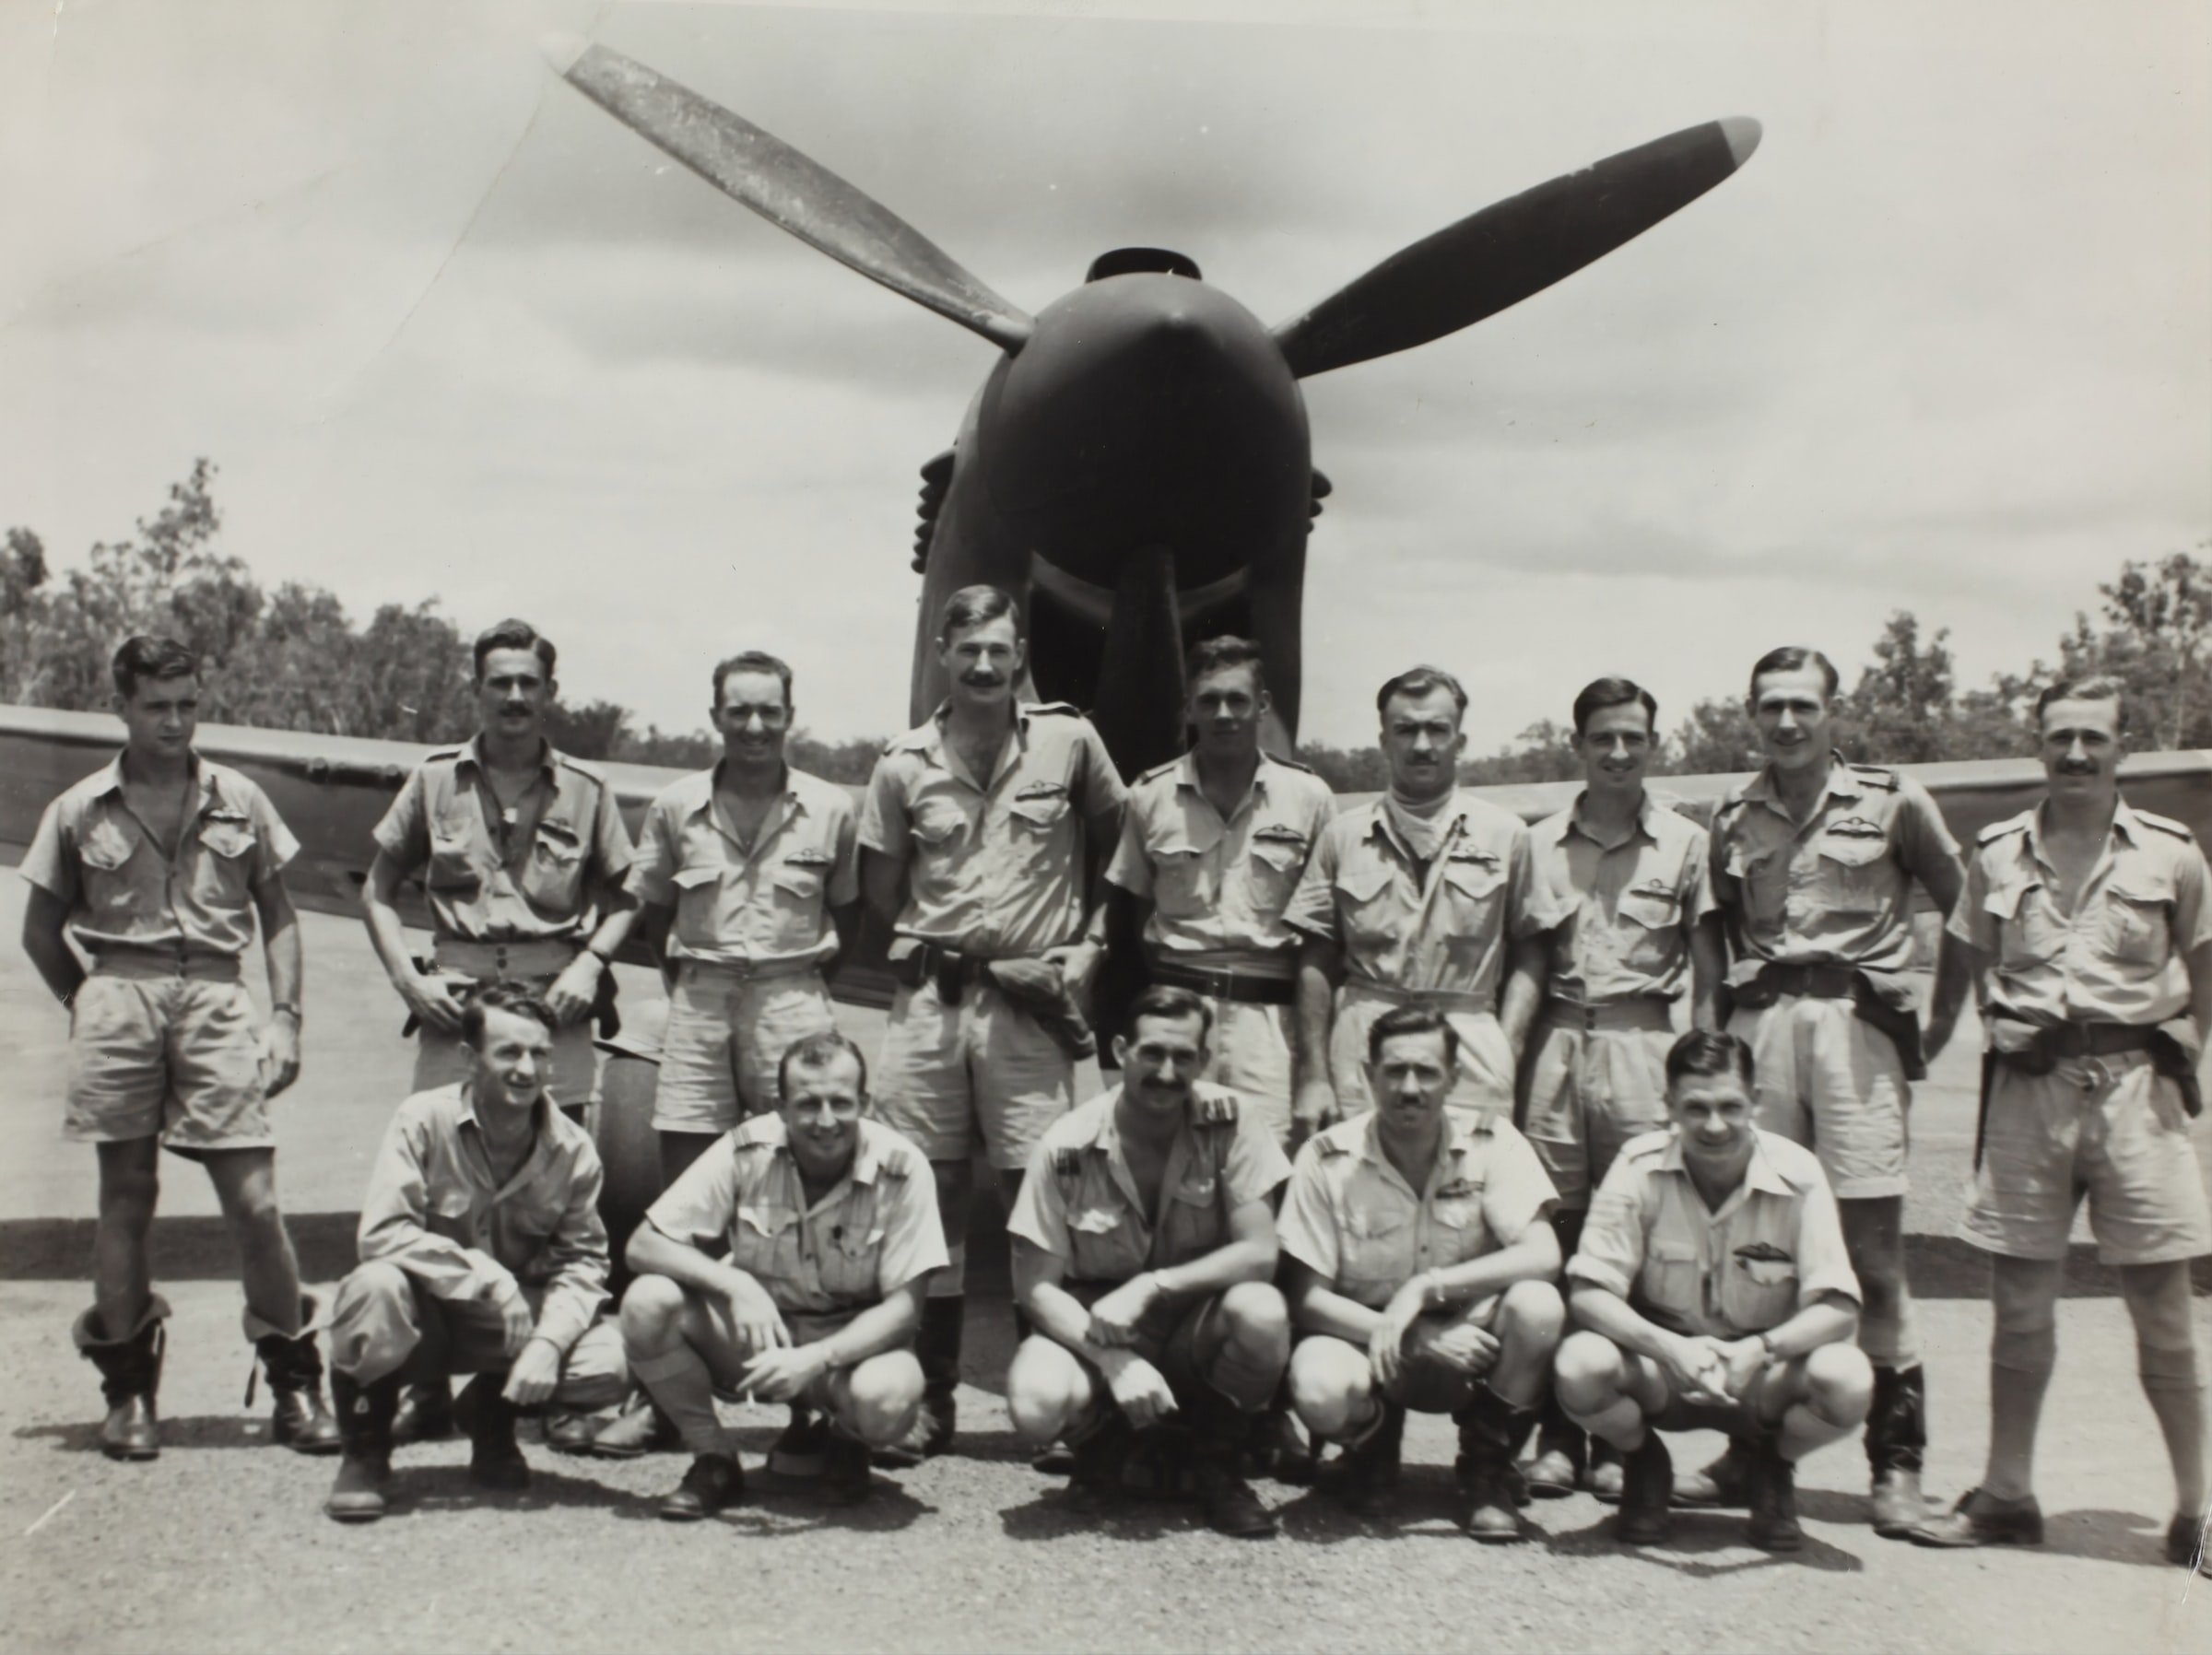 Group of pilots during the war